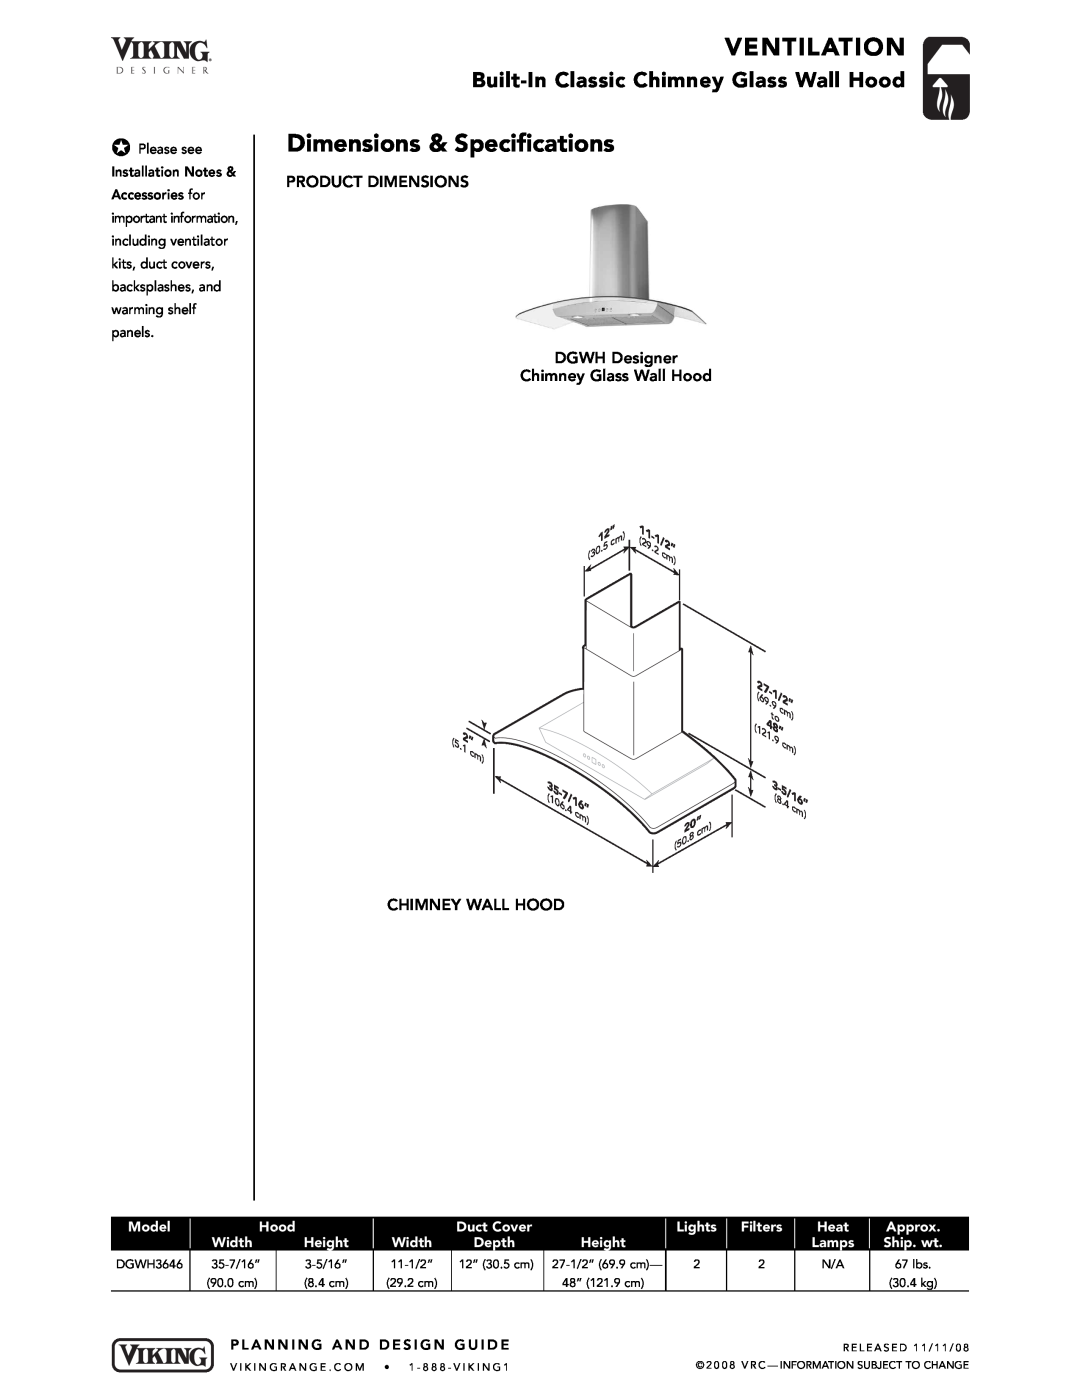 Viking Dimensions & Specifications, PRODUCT DIMENSIONS DGWH Designer Chimney Glass Wall Hood, Chimney Wall Hood, Model 